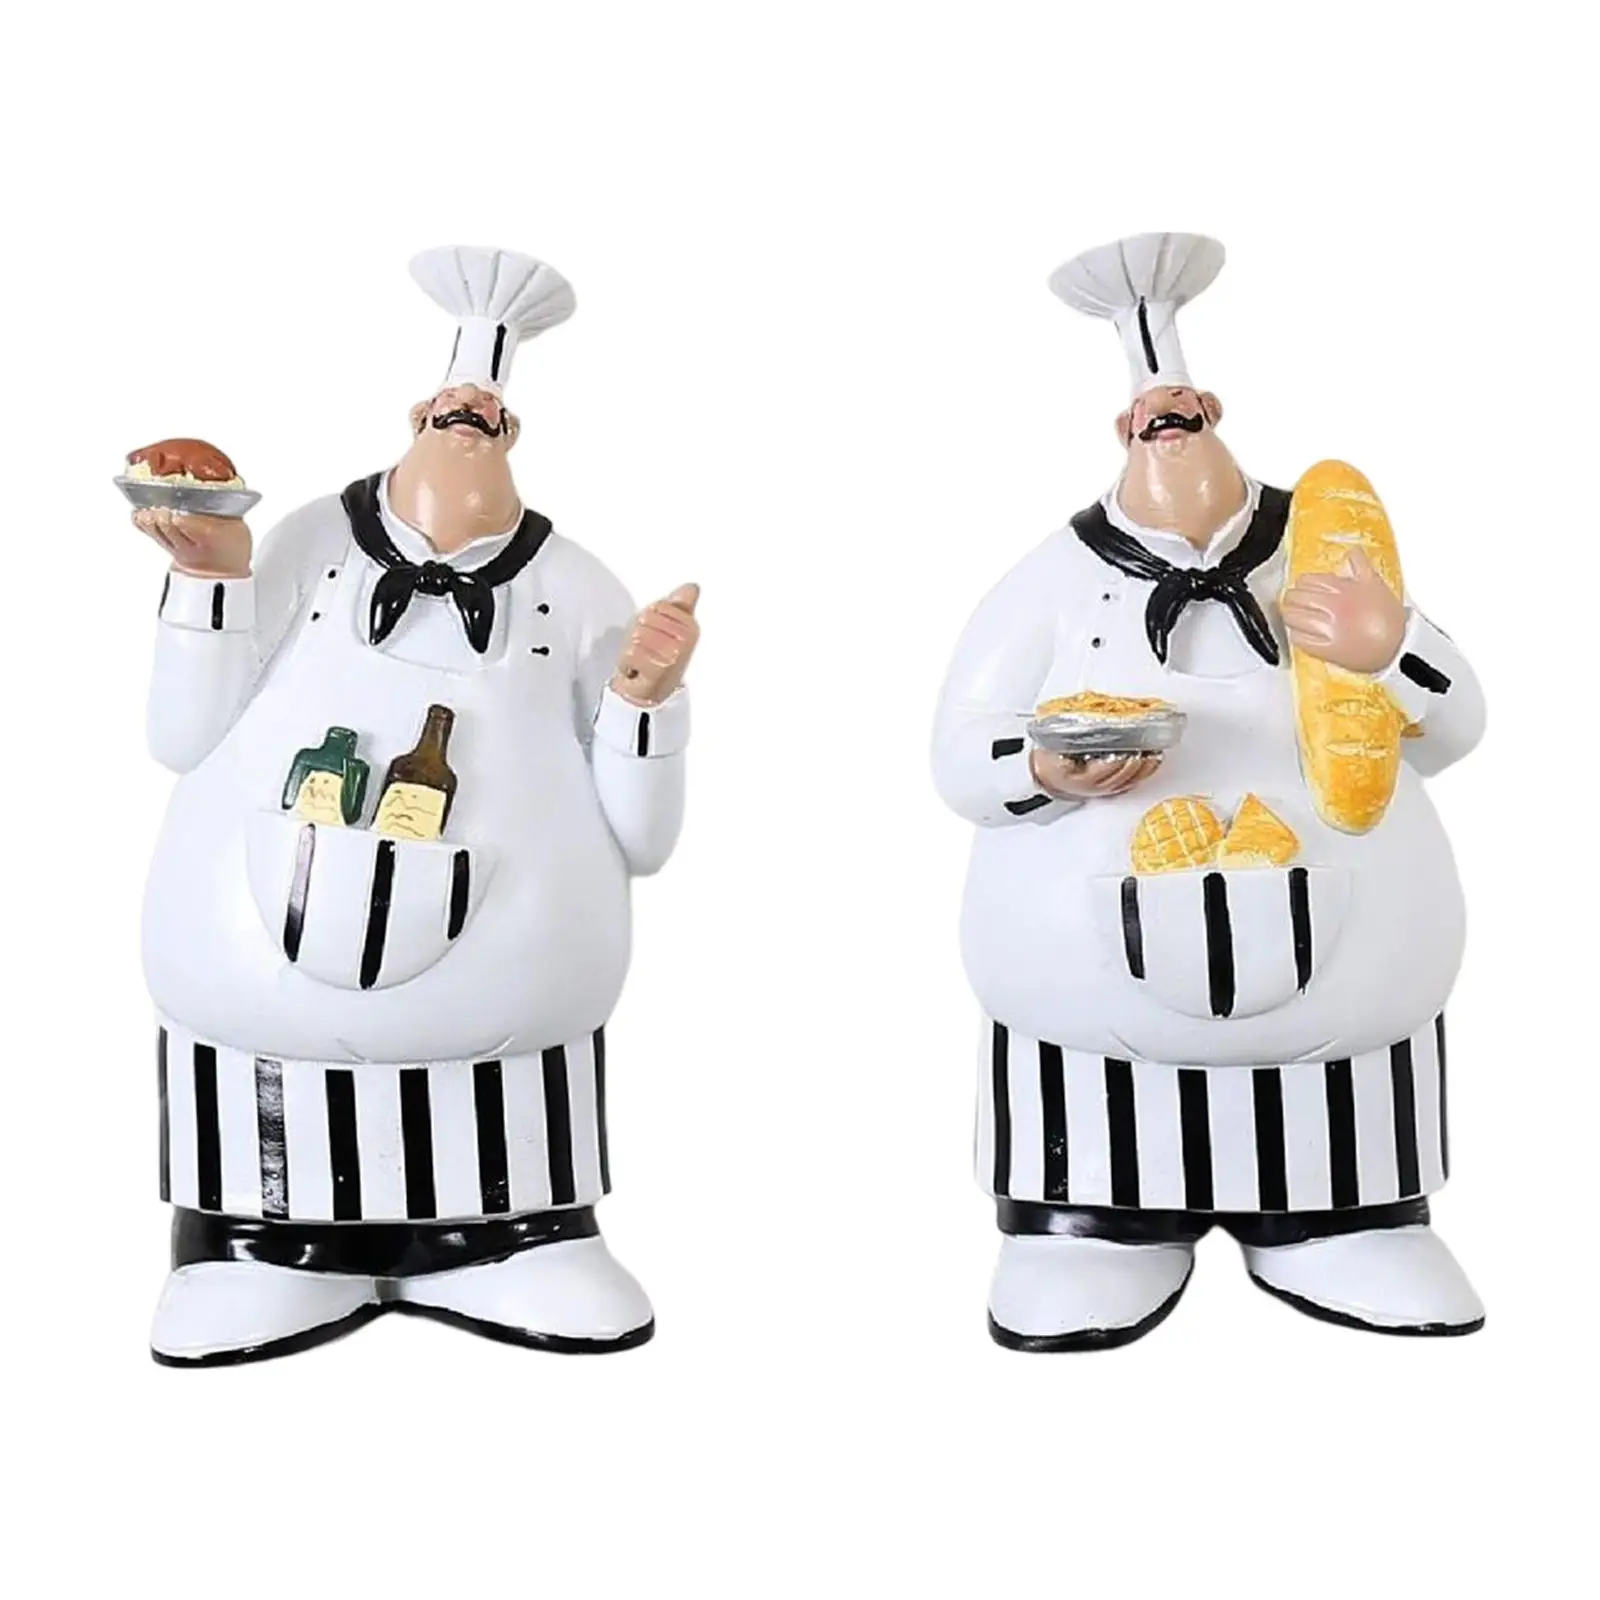 2x Wall Mounted Italian Chef Figurines Collection Welcome Sign Plaque Cook Statue for Farmhouse Wall Kitchen Home Decor